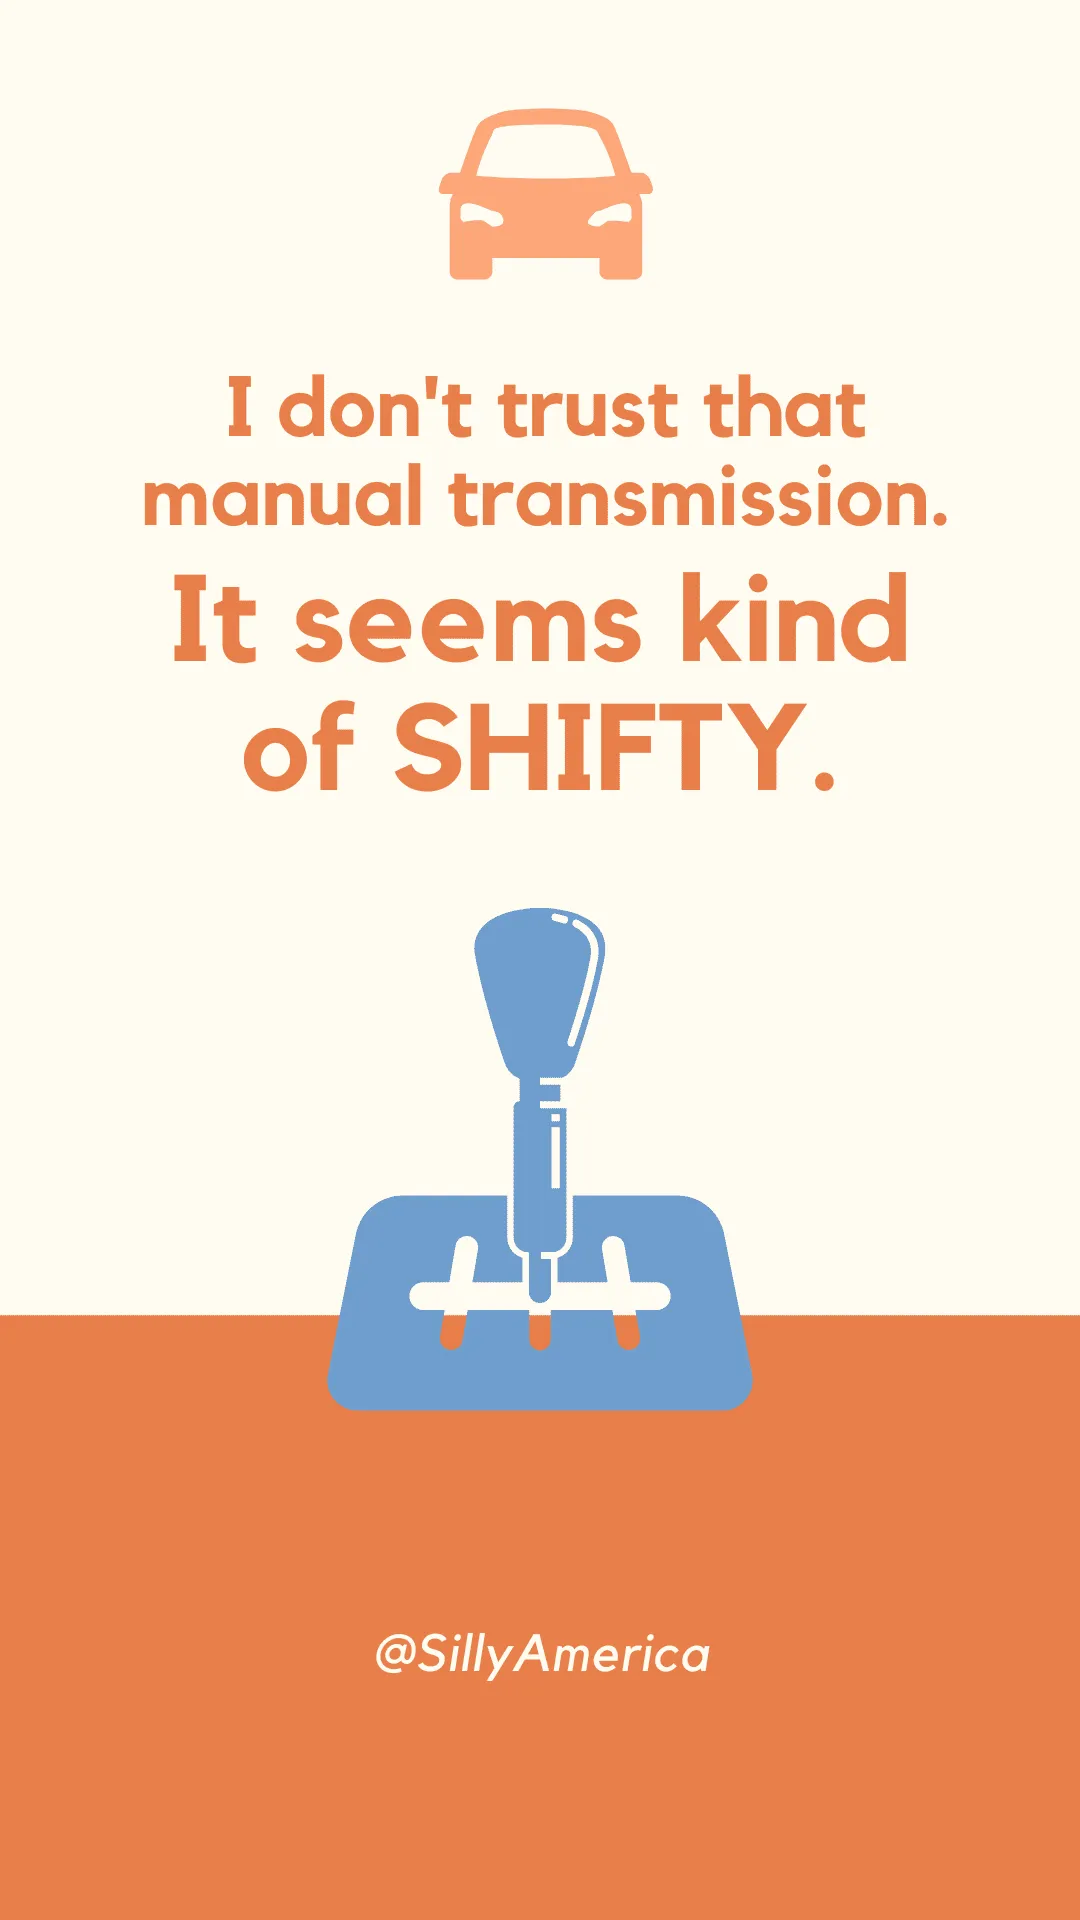 I don't trust that manual transmission. It seems kind of SHIFTY. - Car Puns to fuel your road trip content!